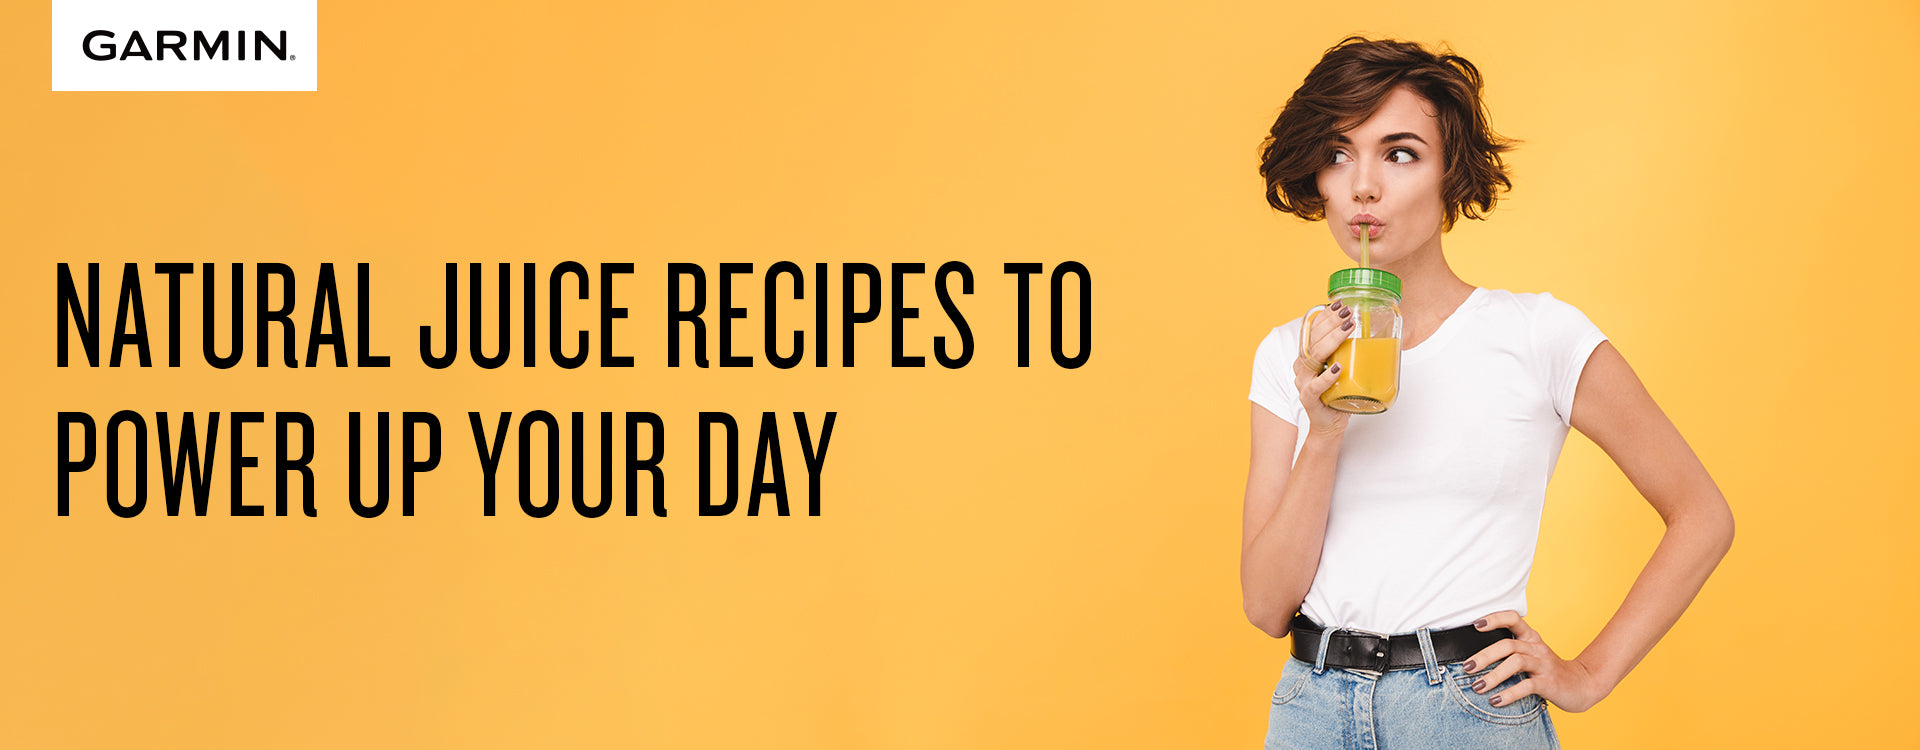 Natural Juice Recipes to Power Up Your Day